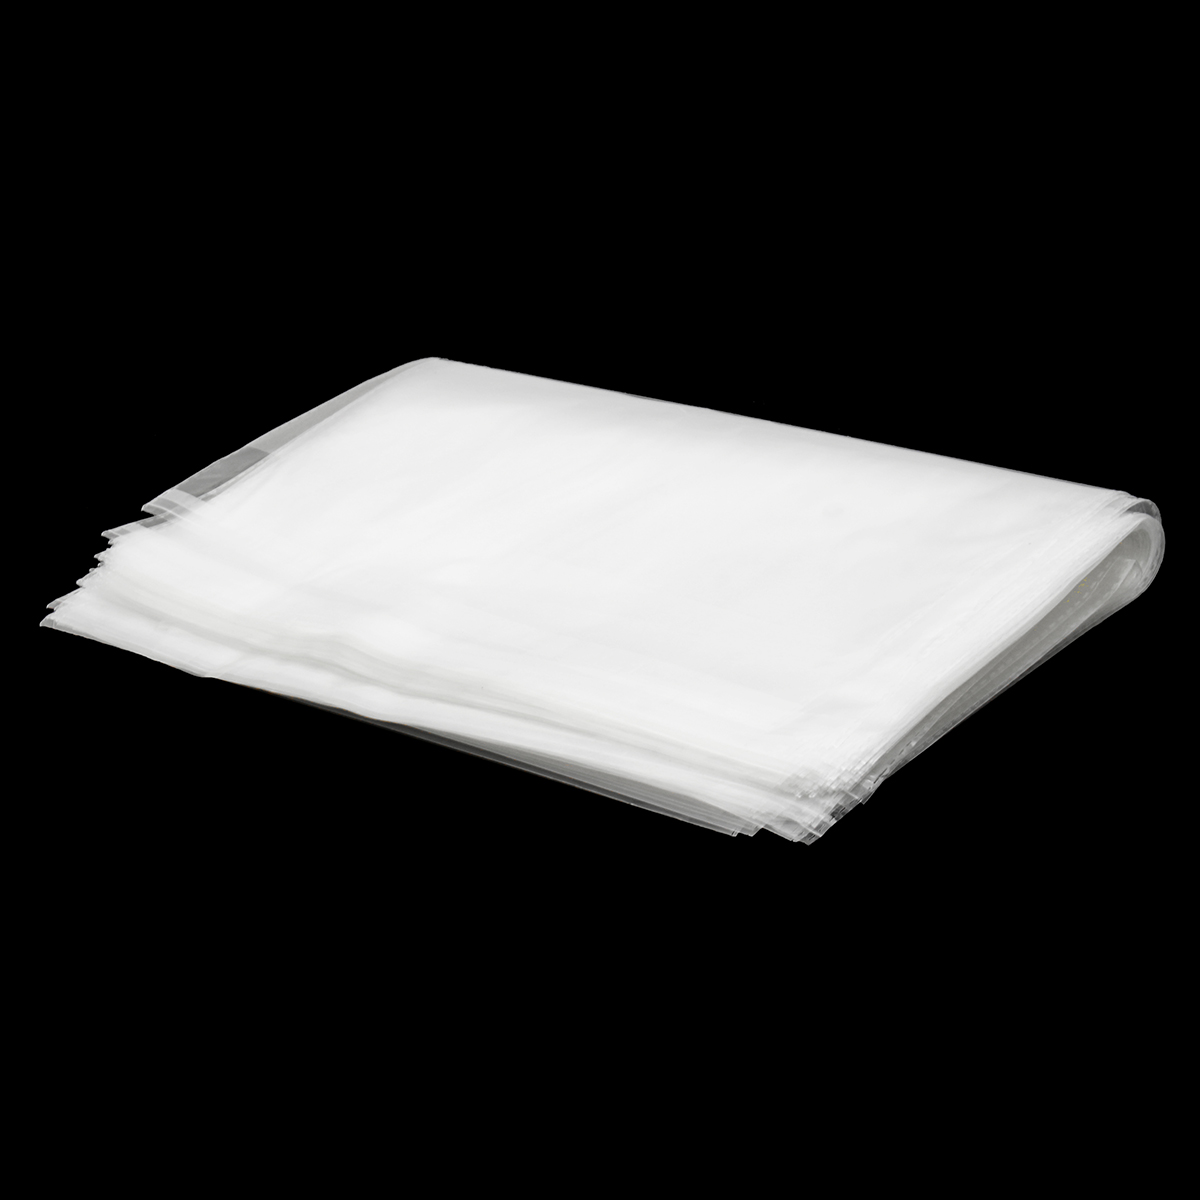 100PcsSet-Antistatic-Clear-Outer-Plastic-Cover-Sleeves-for-12-LP-LD-Vinyl-1521134-1